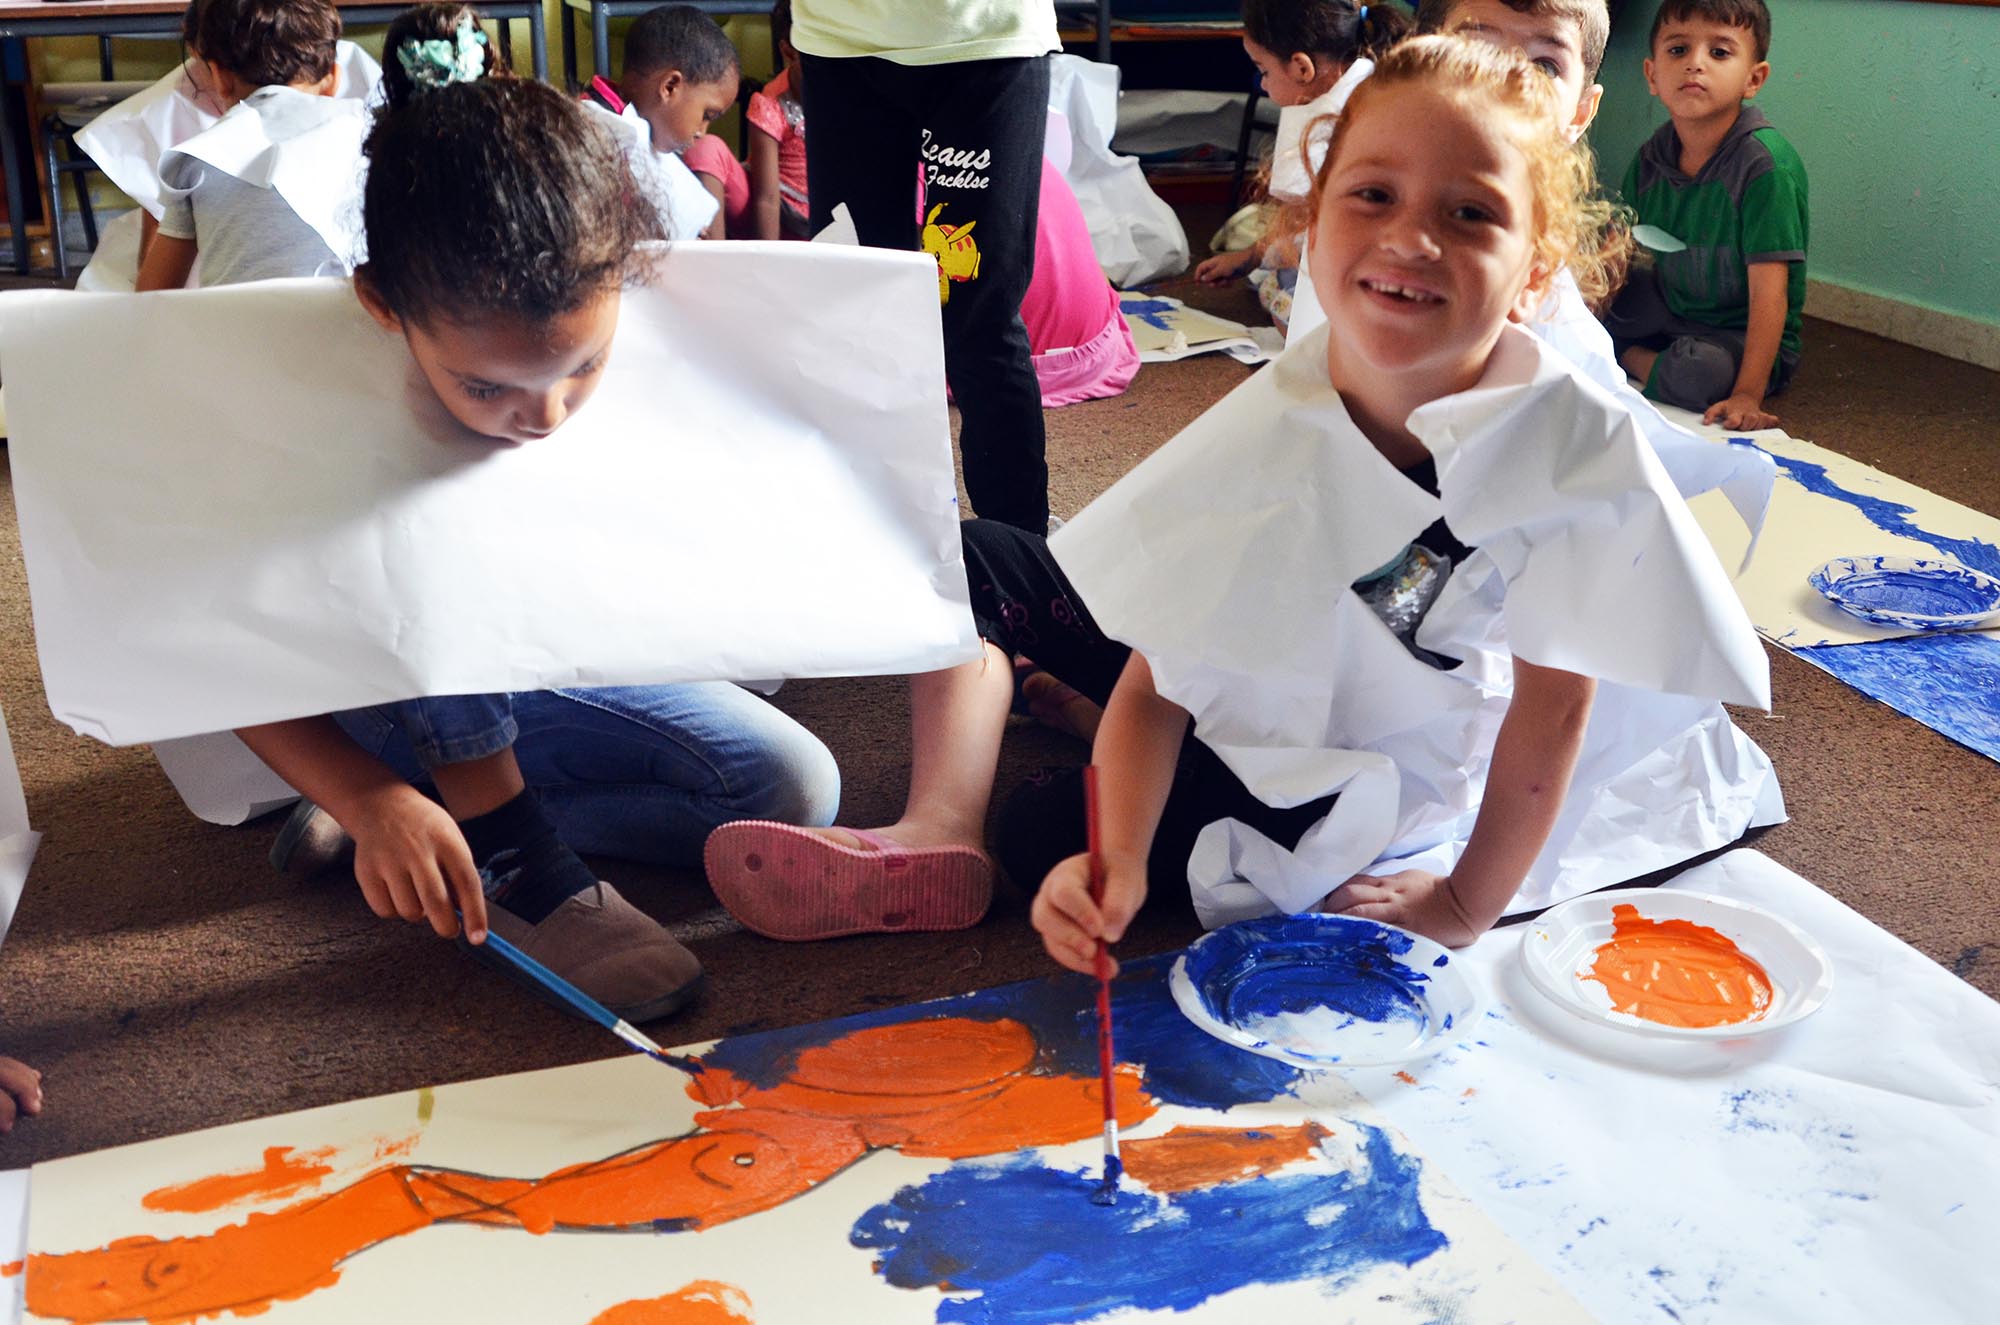 Children take part in arts and crafts activities.